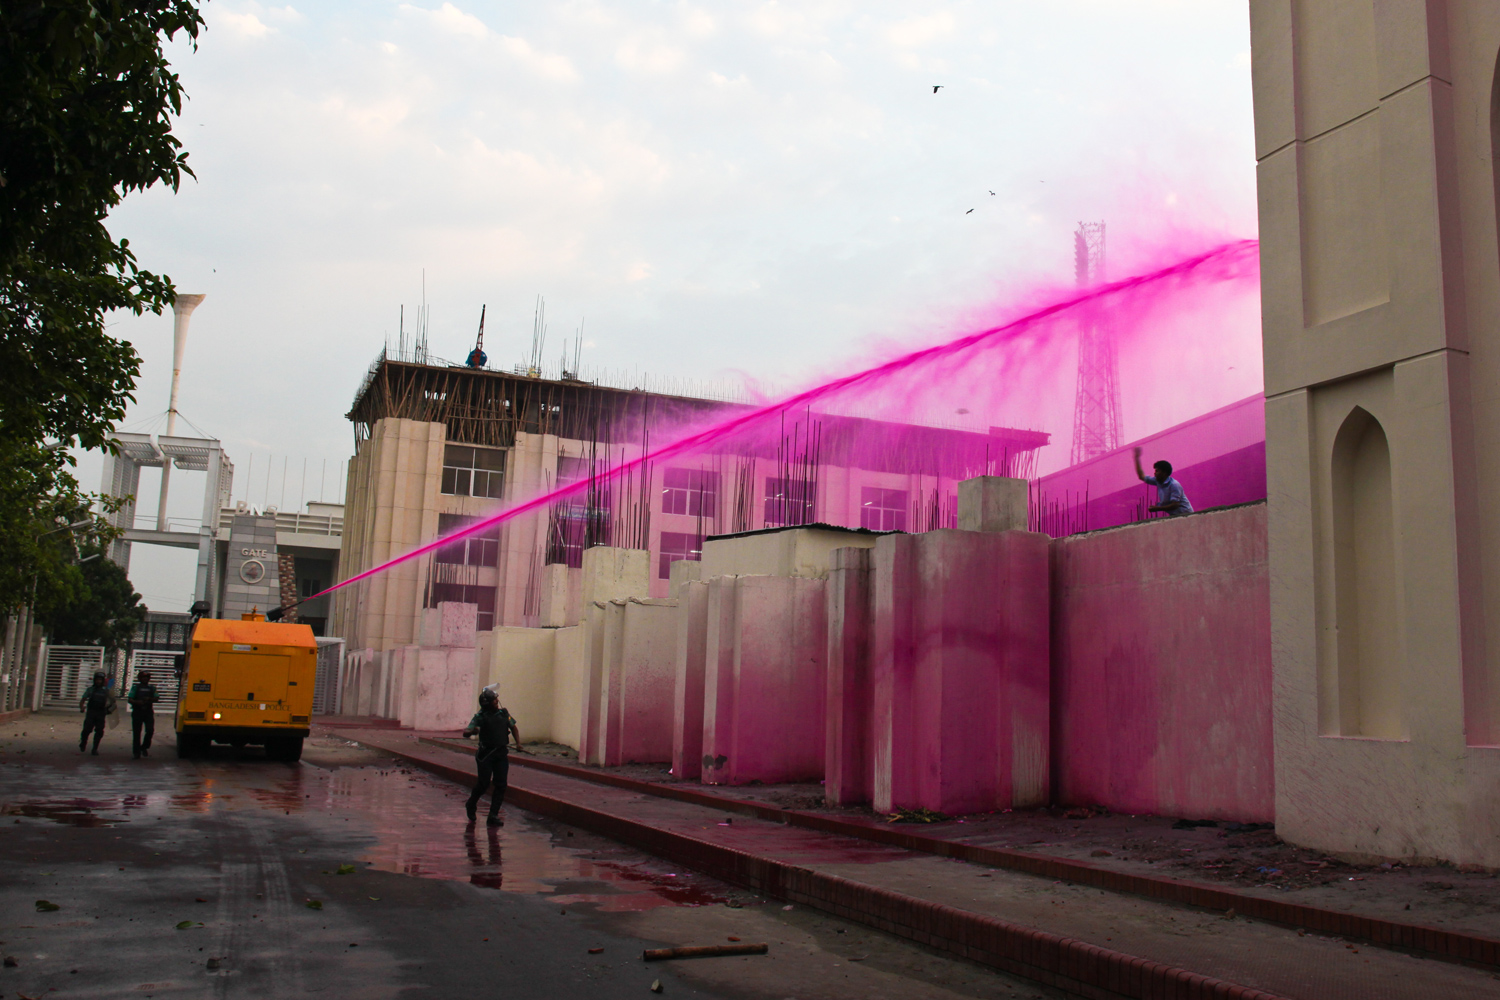 Police use a water cannon during a demonstration on the streets of Dhaka, Bangladesh, April 5, 2011.